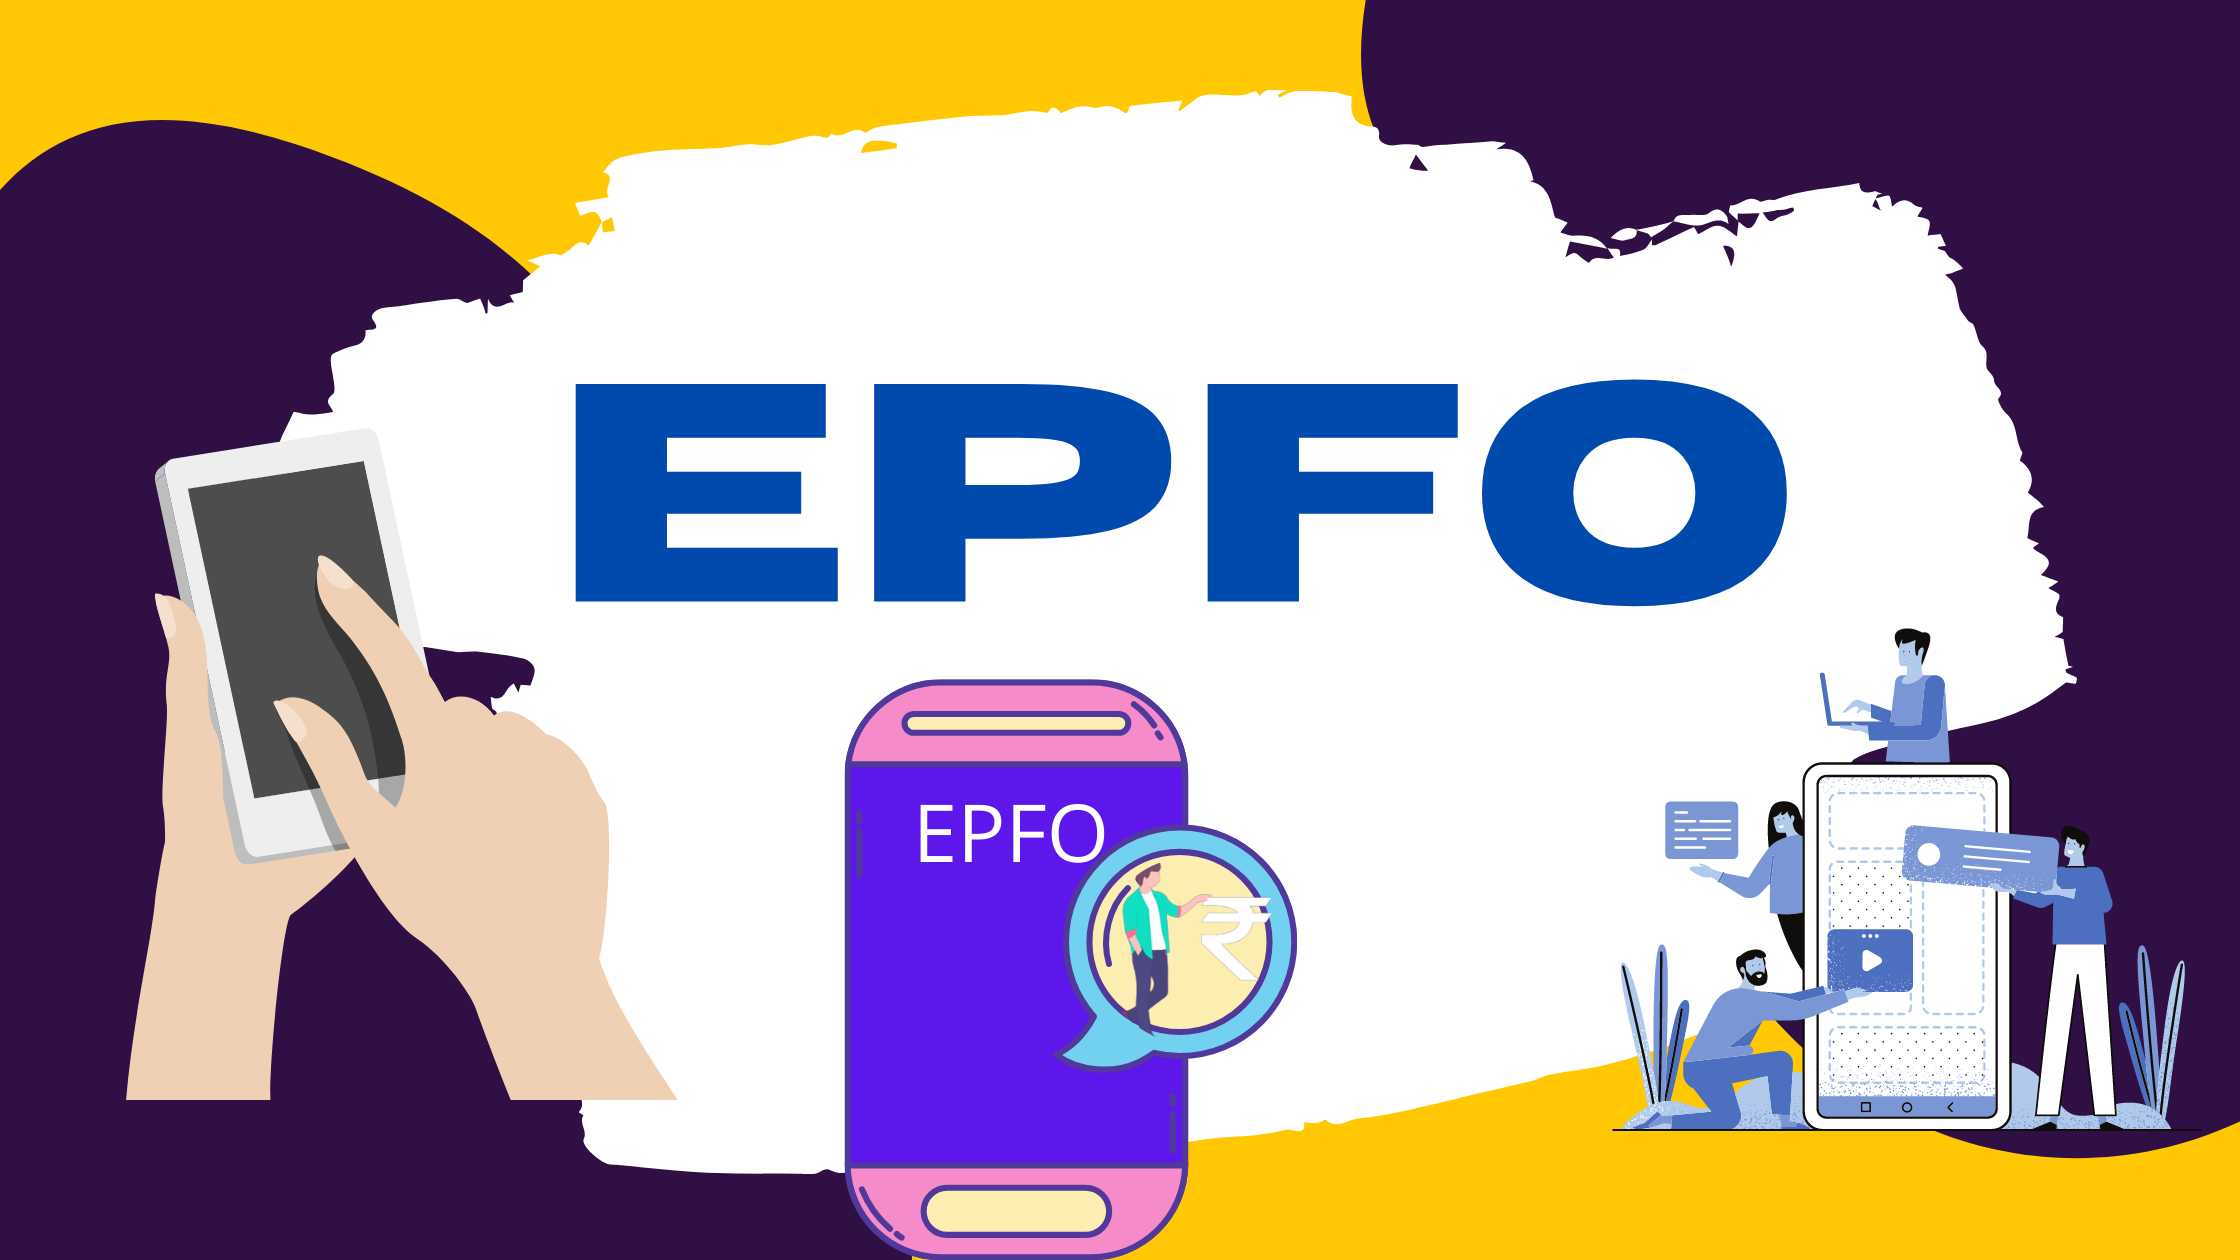 EPFO Payroll Data: EPFO adds 18.23 lakh net members in the month of July, 2022